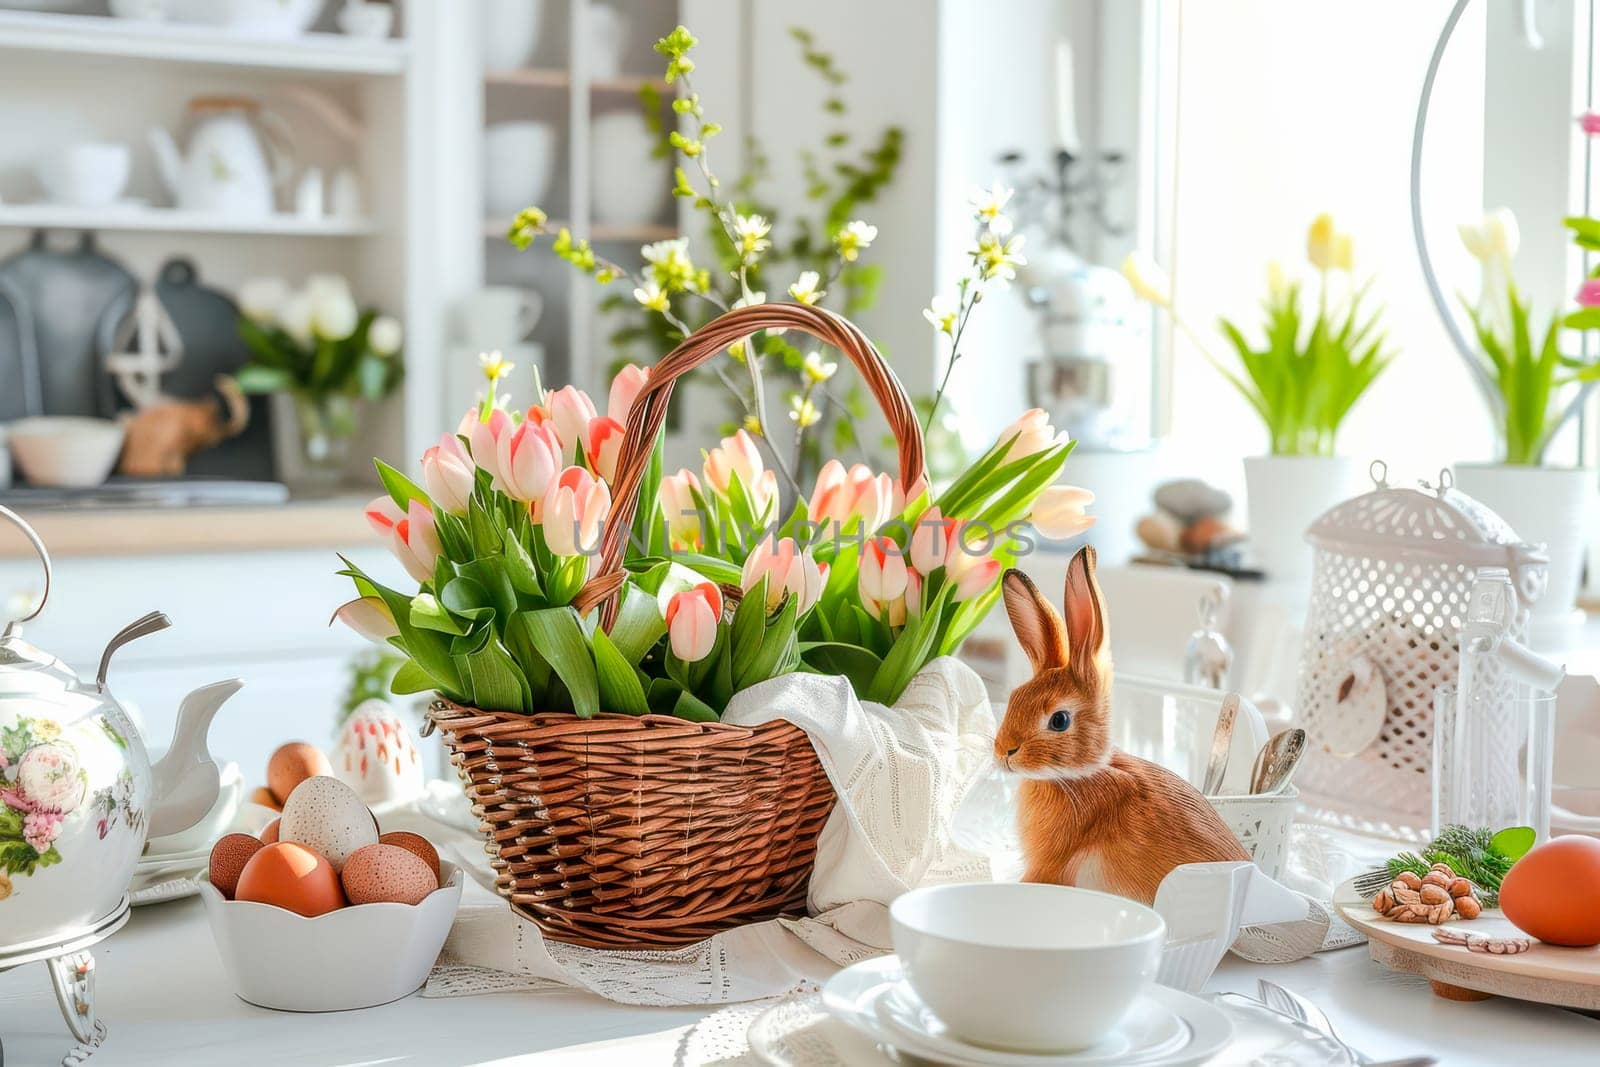 A white table adorned with a basket overflowing with vibrant flowers, creating a cheerful Easter kitchen decoration by vladimka